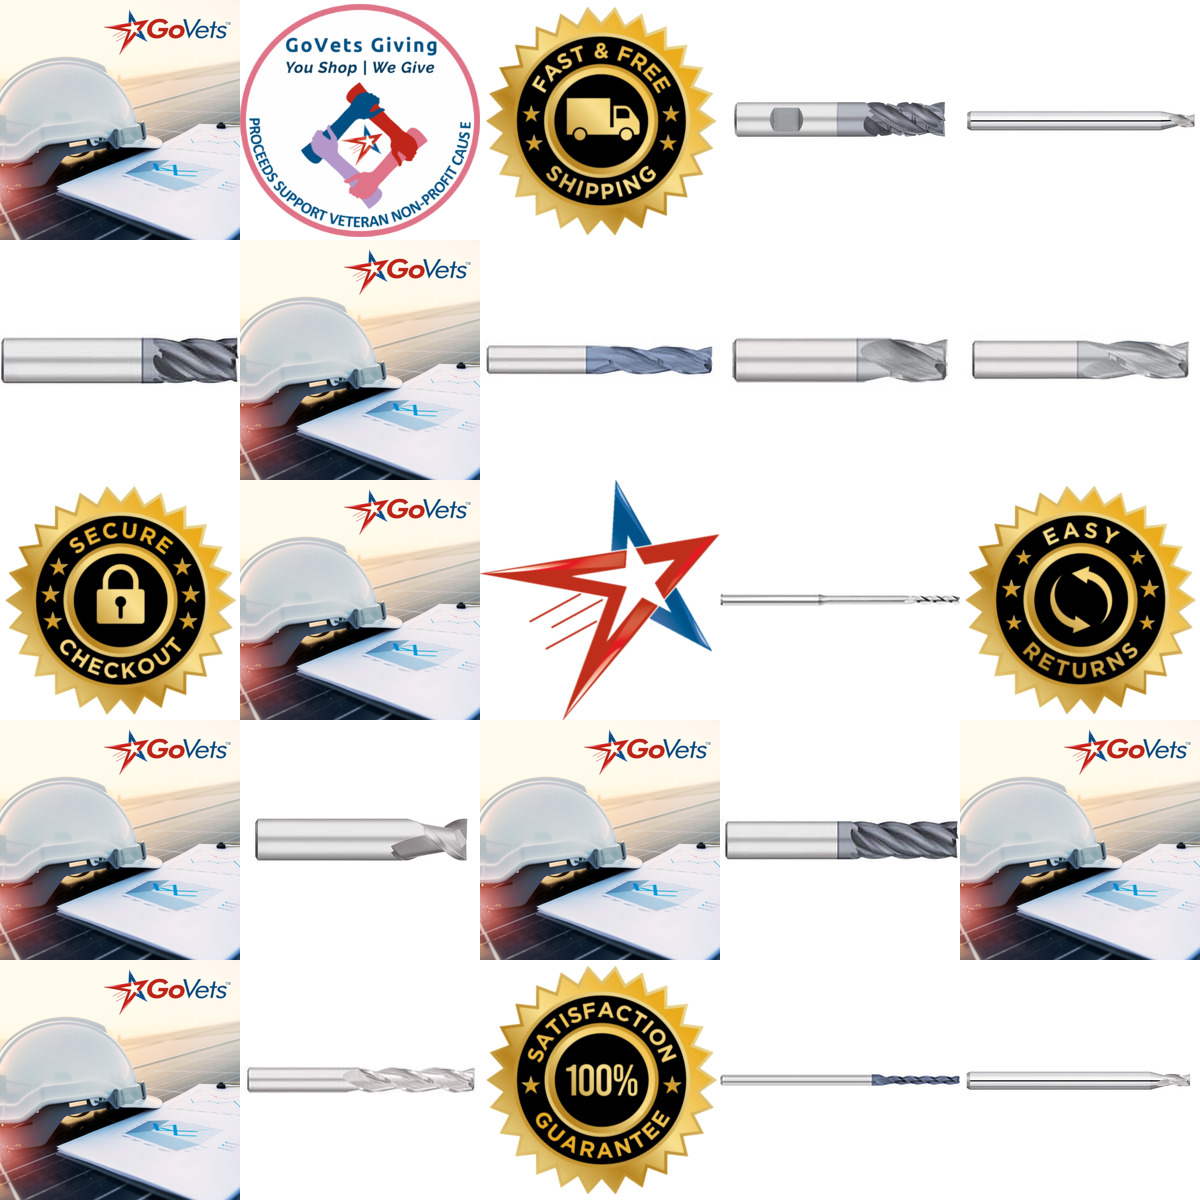 A selection of Titan USA products on GoVets